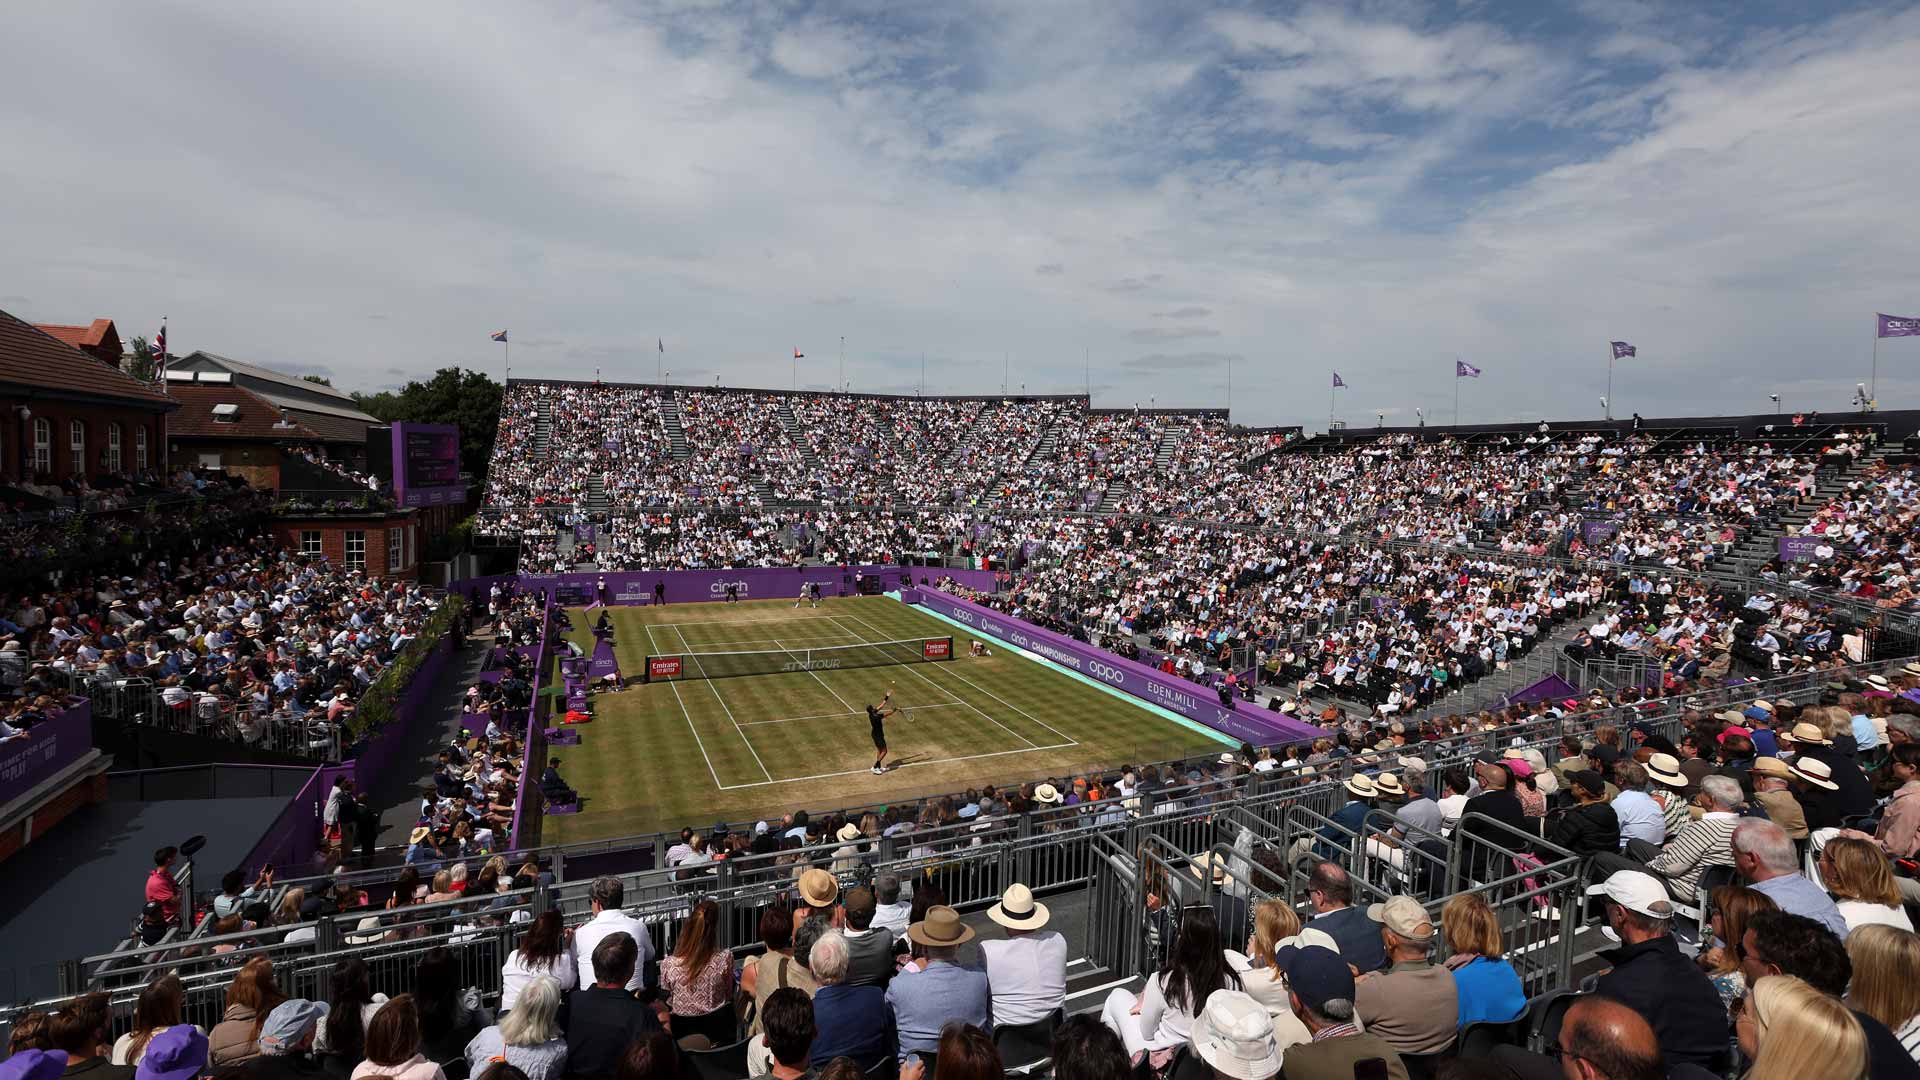 2023 Atp Tour - Cinch Championships 19 To 25 June 2023